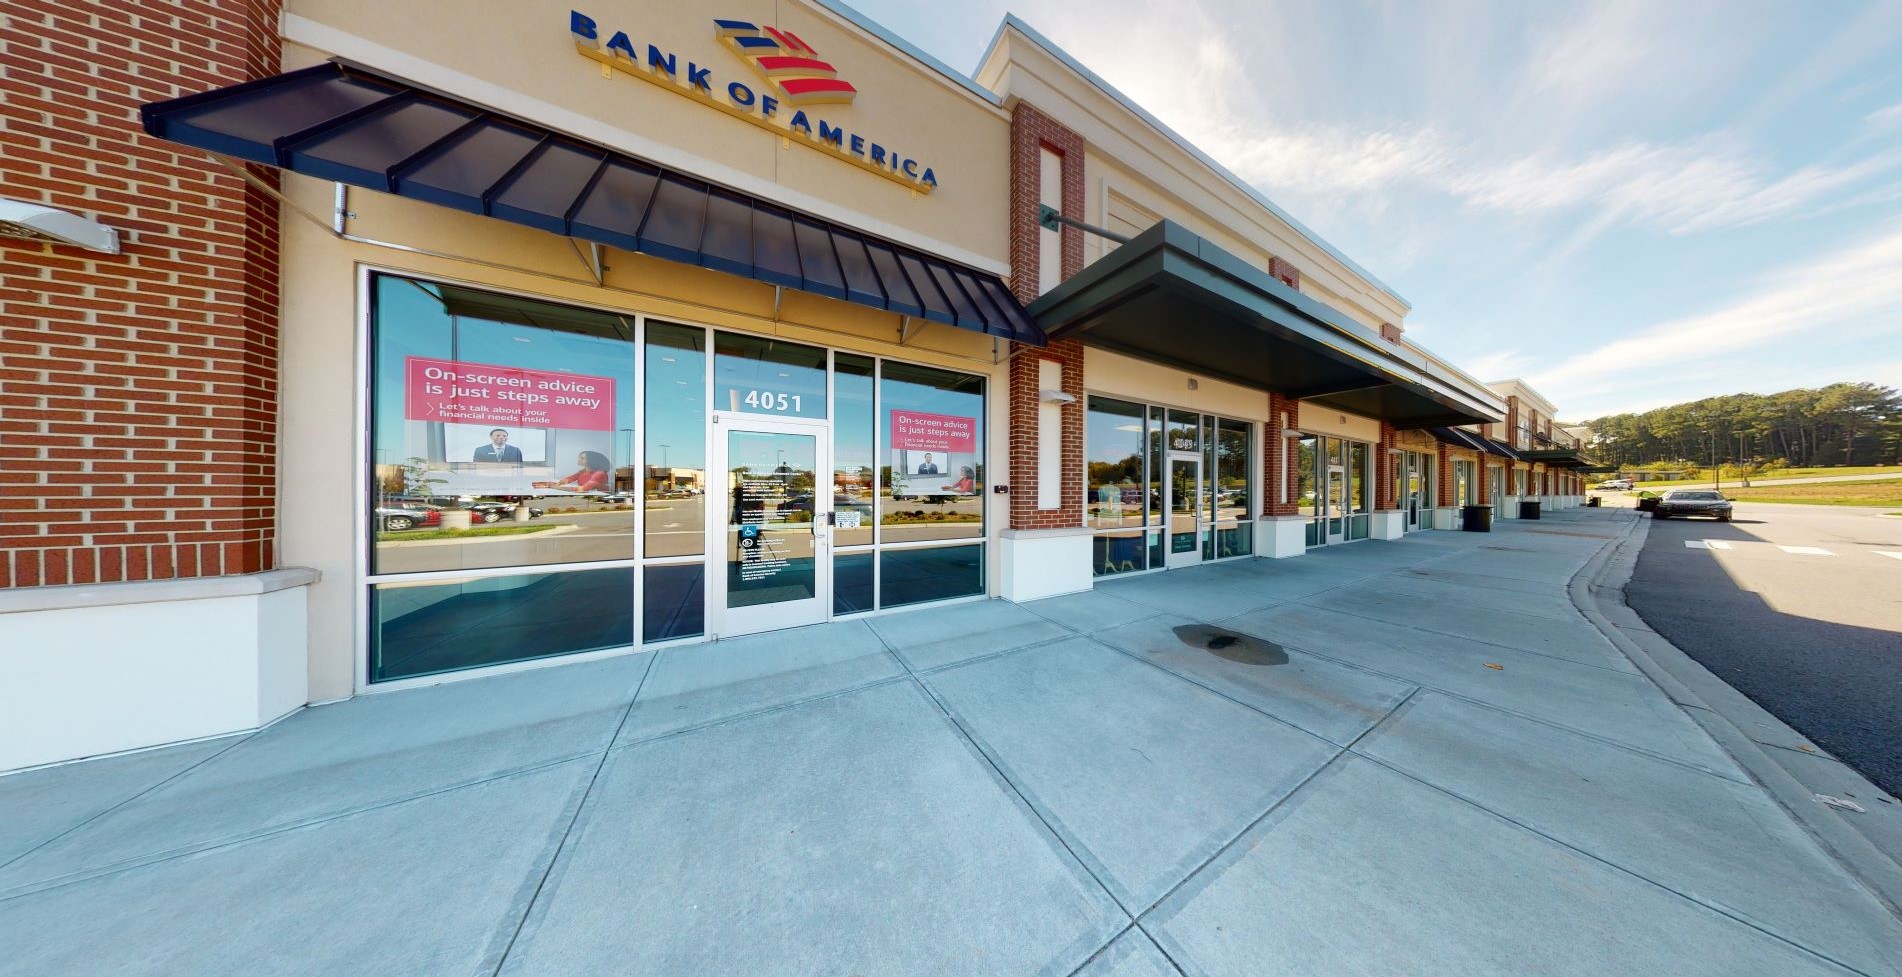 Bank of America Advanced Center with walk-up ATM | 4051 Harris Square Dr, Harrisburg, NC 28075